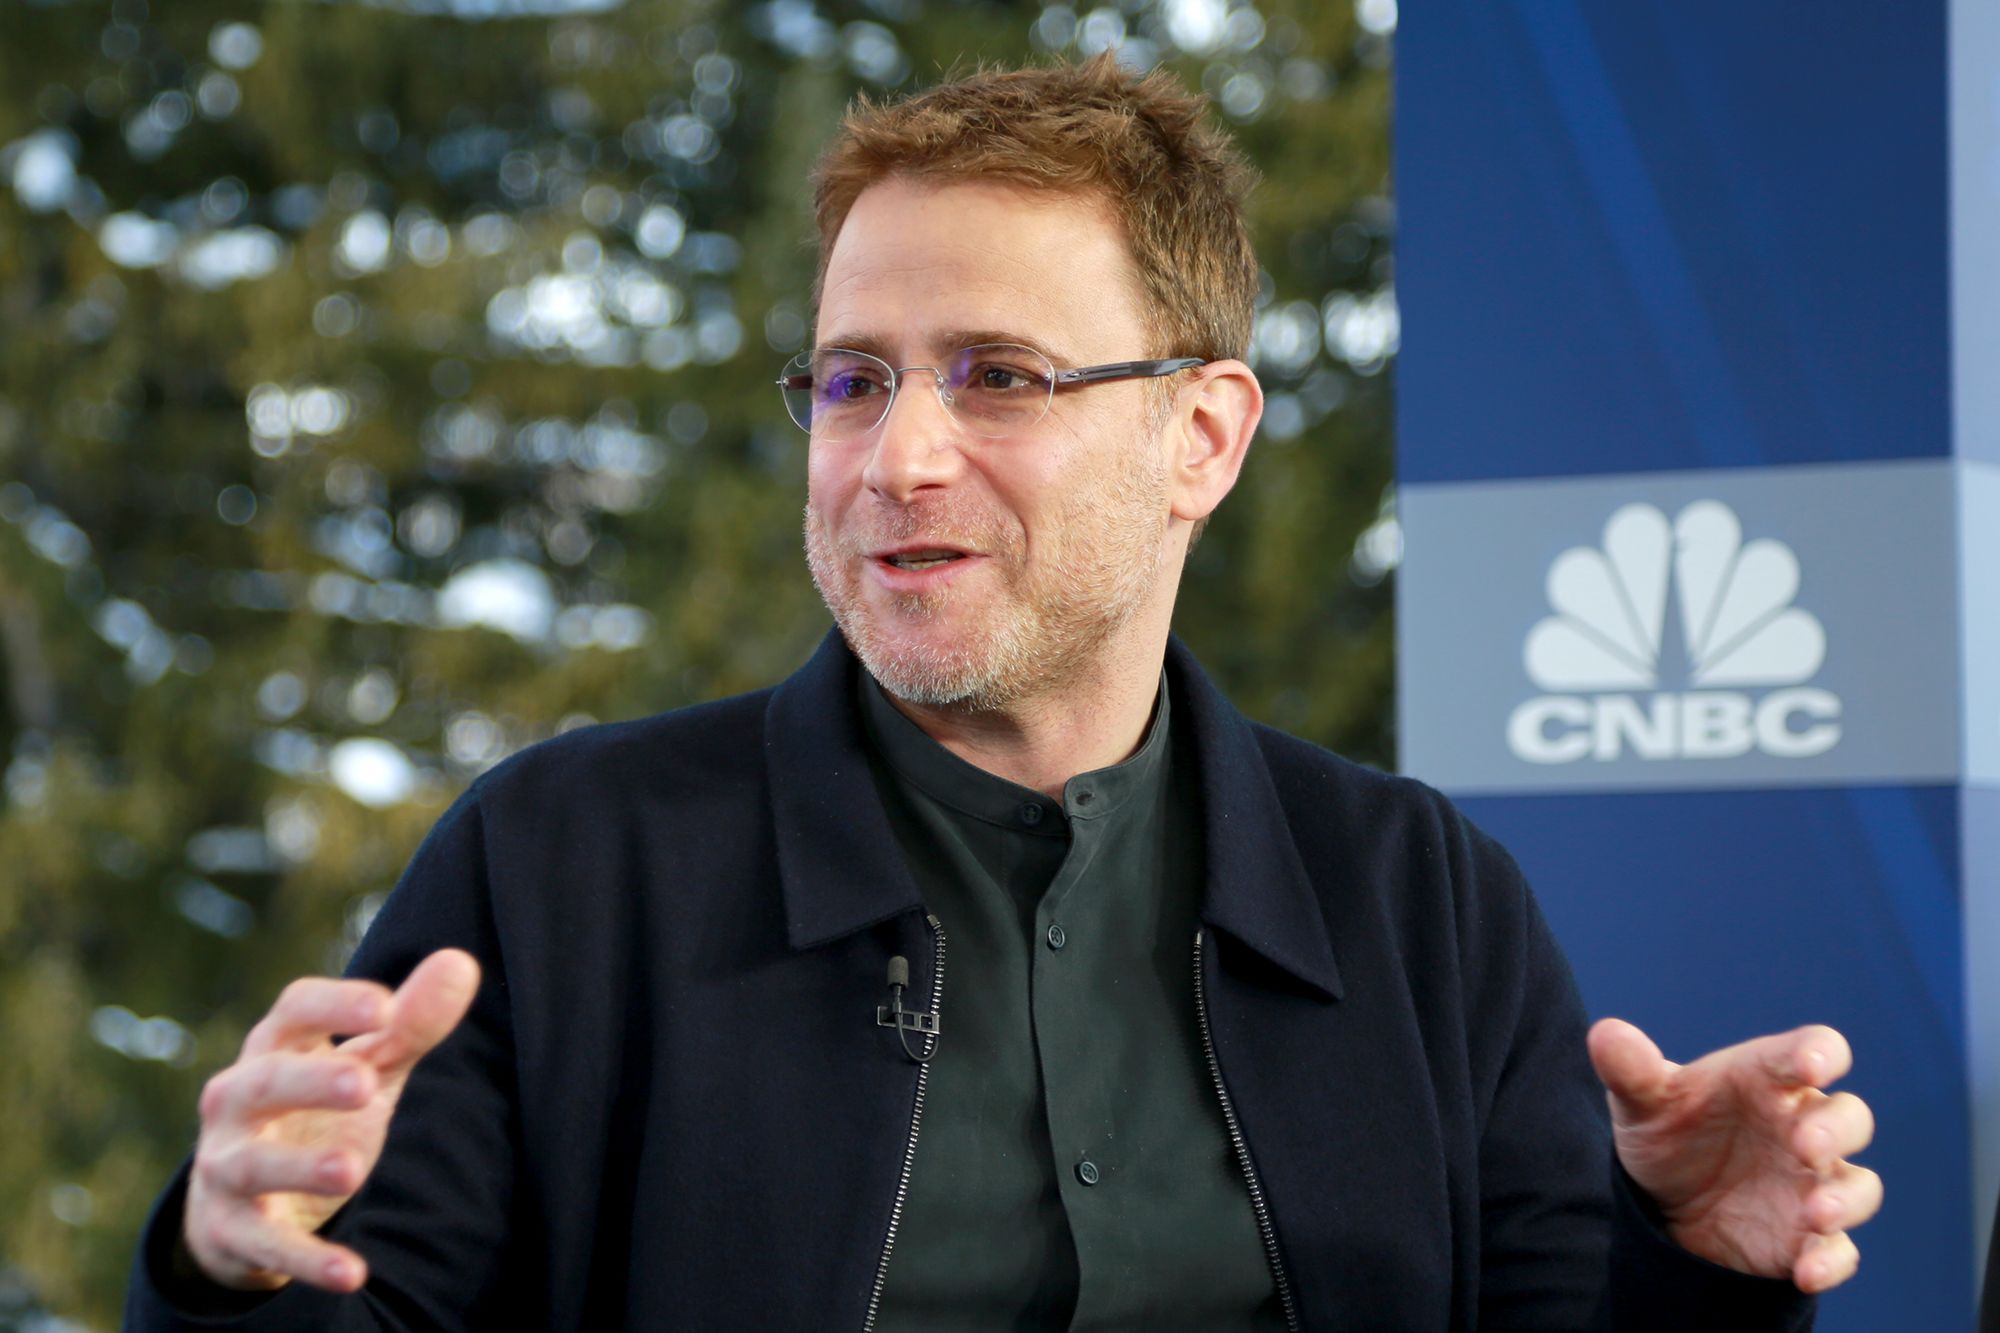 Slack changes ticker symbol to WORK ahead of NYSE debut